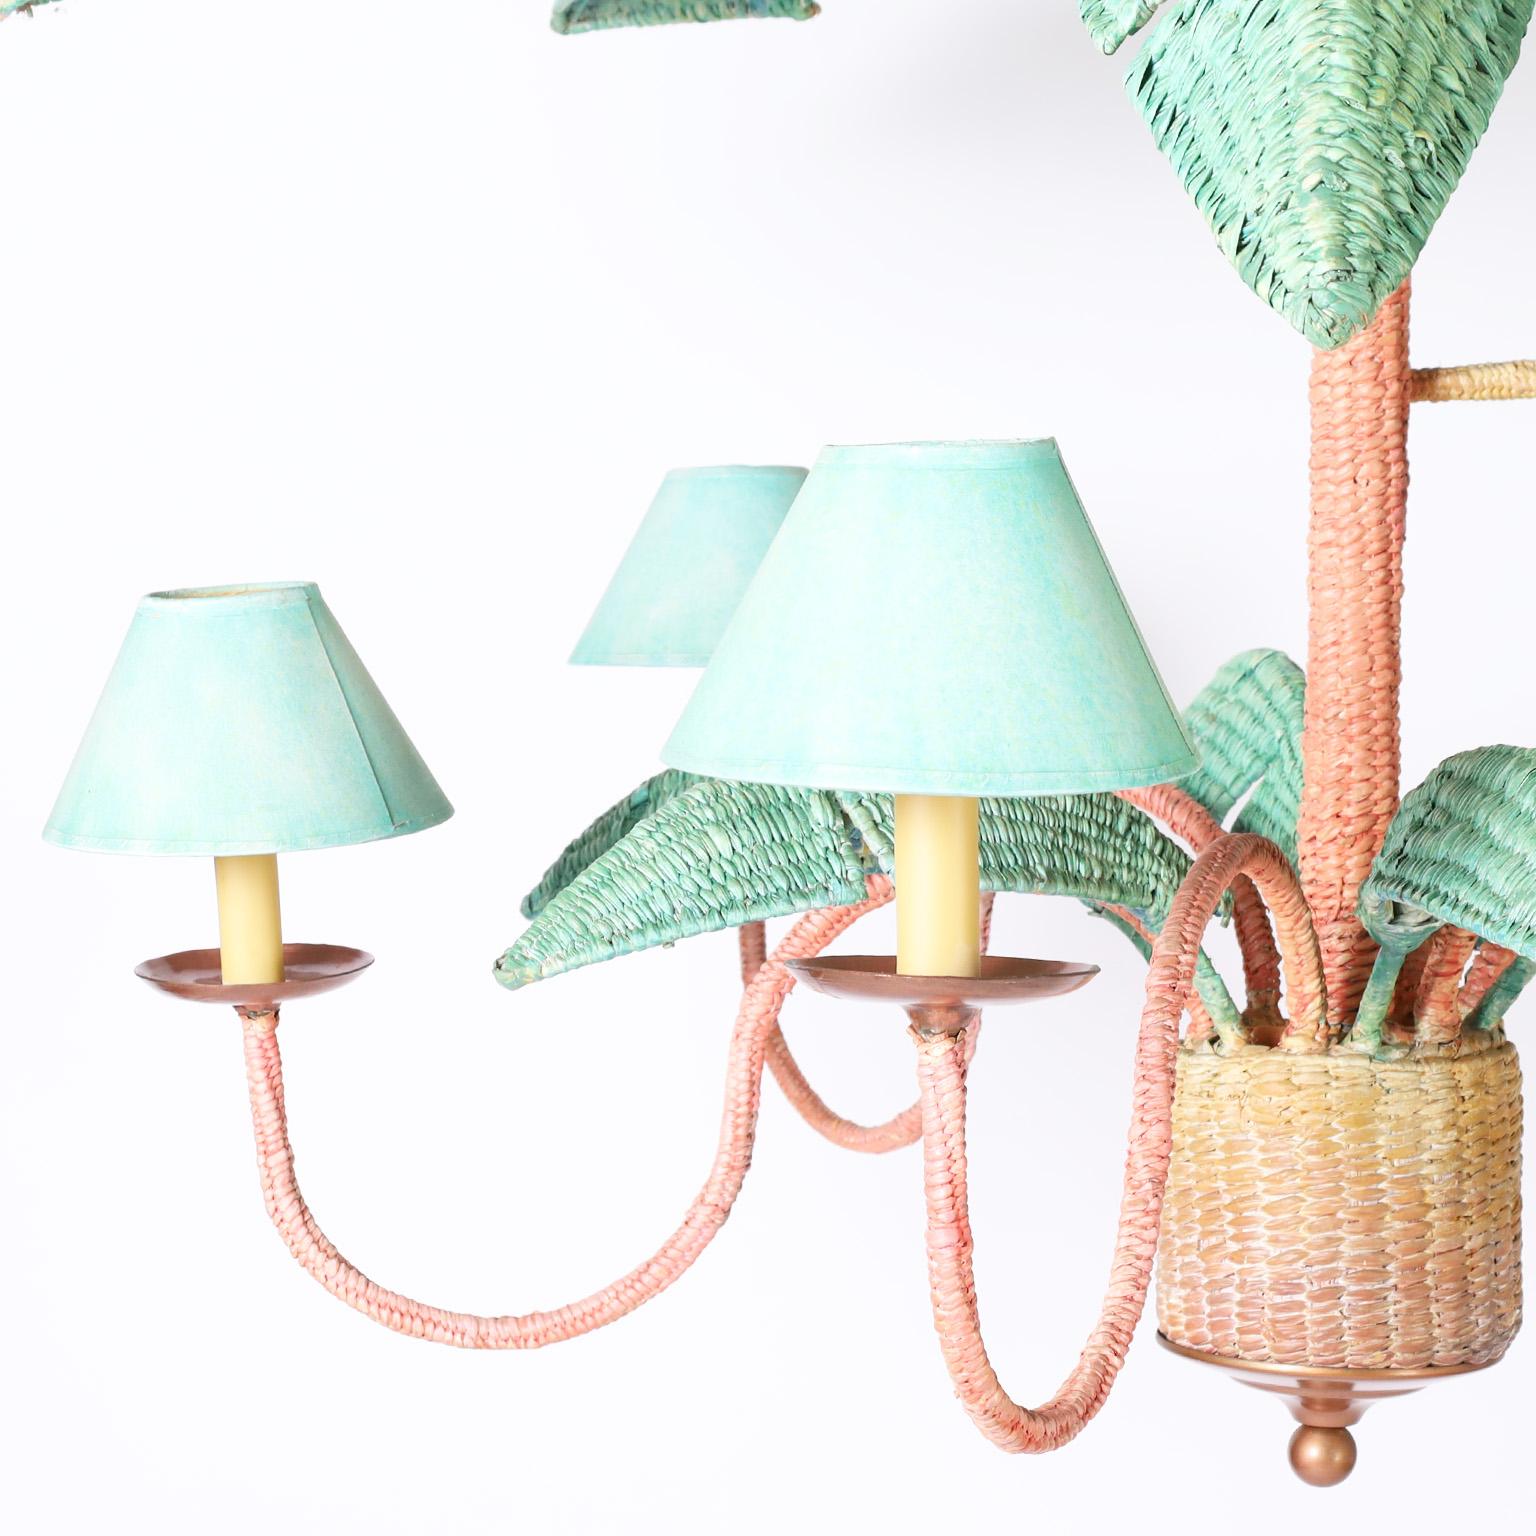 Hand-Woven Mario Torres Midcentury Wicker Palm Leaf Chandelier with Monkey